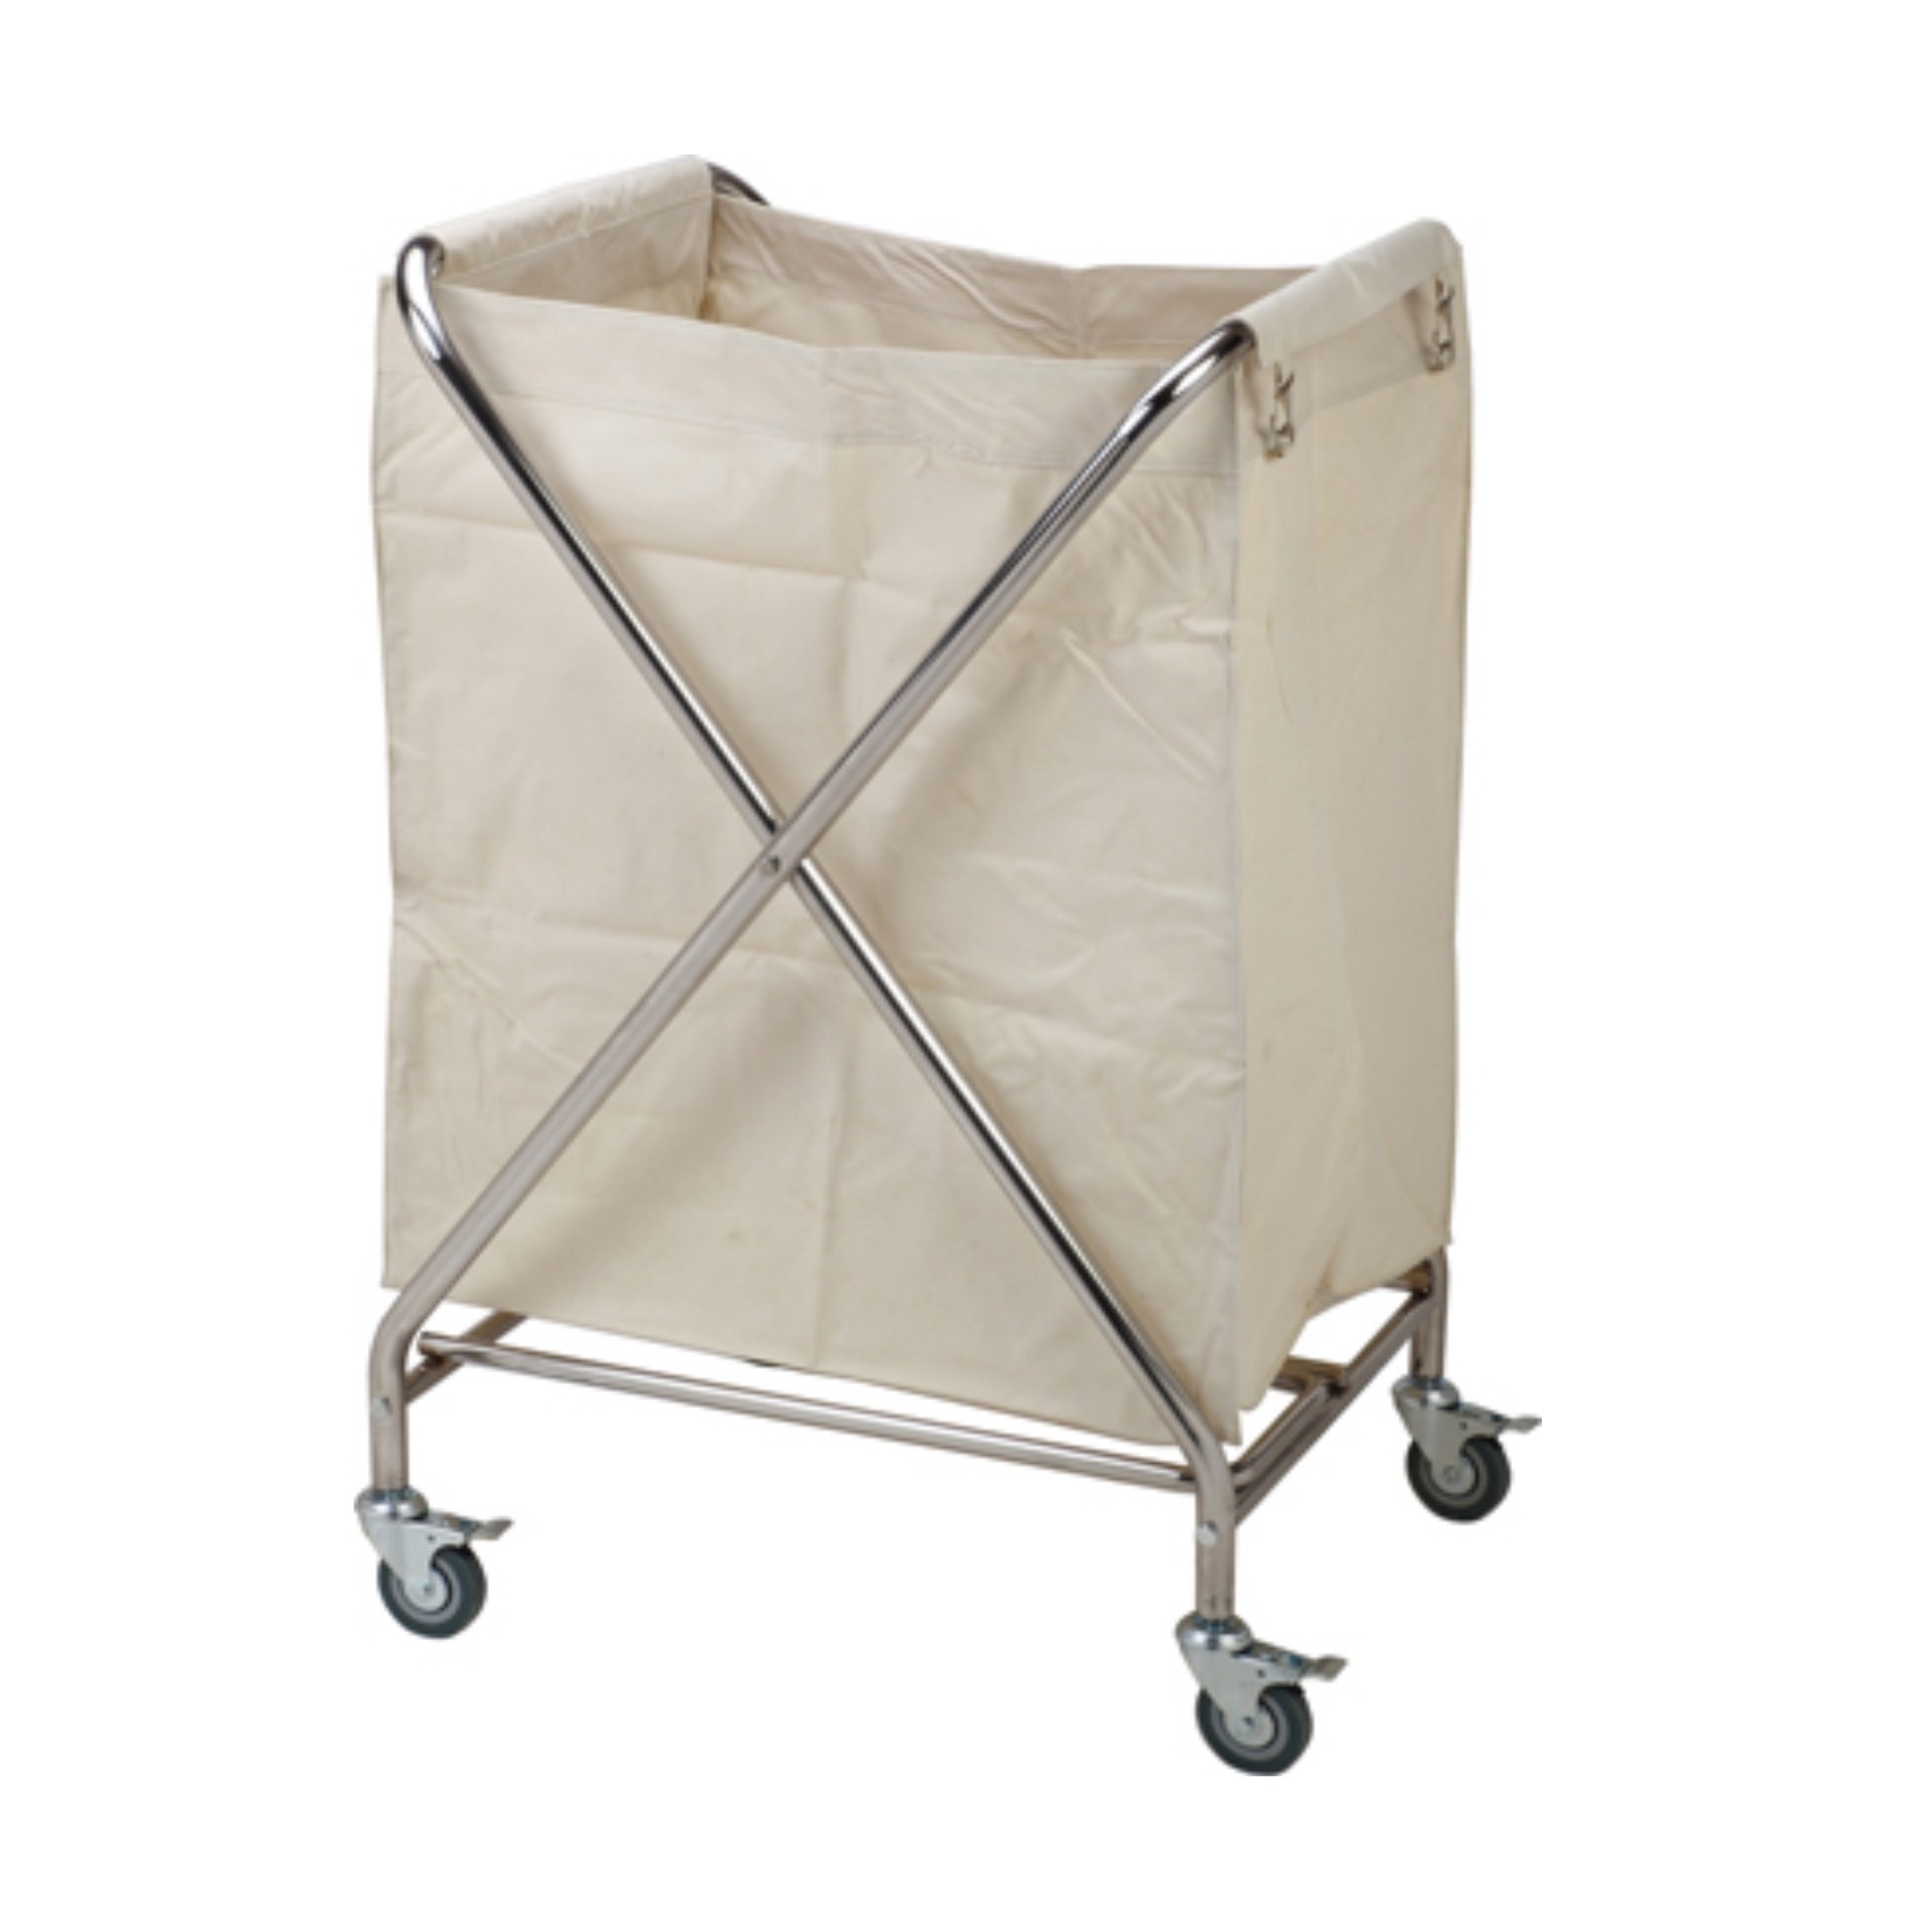 X Shaped Stainless Steel Hotel Guest Room Linen Trolley for Hospital Cleaning (FW-16)